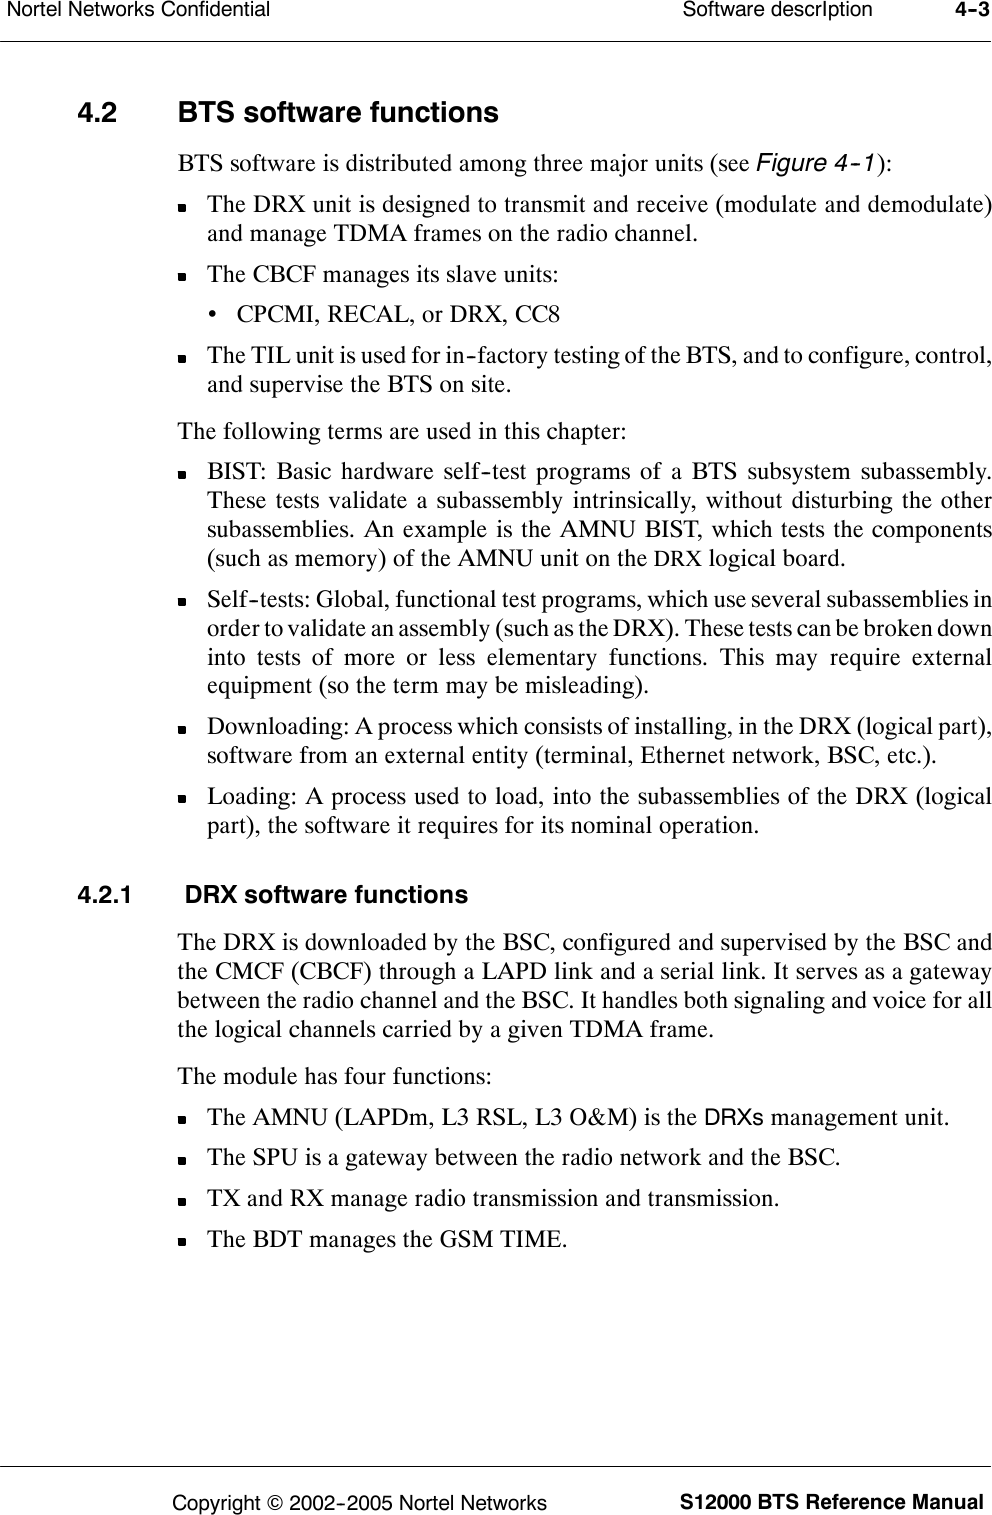 Software descrIptionNortel Networks Confidential 4--3S12000 BTS Reference ManualCopyright ©2002--2005 Nortel Networks4.2 BTS software functionsBTS software is distributed among three major units (see Figure 4--1):The DRX unit is designed to transmit and receive (modulate and demodulate)and manage TDMA frames on the radio channel.The CBCF manages its slave units:•CPCMI, RECAL, or DRX, CC8The TIL unit is used for in--factory testing of the BTS, and to configure, control,and supervise the BTS on site.The following terms are used in this chapter:BIST: Basic hardware self--test programs of a BTS subsystem subassembly.These tests validate a subassembly intrinsically, without disturbing the othersubassemblies. An example is the AMNU BIST, which tests the components(such as memory) of the AMNU unit on theDRXlogical board.Self--tests: Global, functional test programs, which use several subassemblies inorder to validate an assembly (such as the DRX). These tests can be broken downinto tests of more or less elementary functions. This may require externalequipment (so the term may be misleading).Downloading: A process which consists of installing, in the DRX (logical part),software from an external entity (terminal, Ethernet network, BSC, etc.).Loading: A process used to load, into the subassemblies of the DRX (logicalpart), the software it requires for its nominal operation.4.2.1 DRX software functionsThe DRX is downloaded by the BSC, configured and supervised by the BSC andthe CMCF (CBCF) through a LAPD link and a serial link. It serves as a gatewaybetween the radio channel and the BSC. It handles both signaling and voice for allthe logical channels carried by a given TDMA frame.The module has four functions:The AMNU (LAPDm, L3 RSL, L3 O&amp;M) is theDRXsmanagement unit.The SPU is a gateway between the radio network and the BSC.TX and RX manage radio transmission and transmission.The BDT manages the GSM TIME.